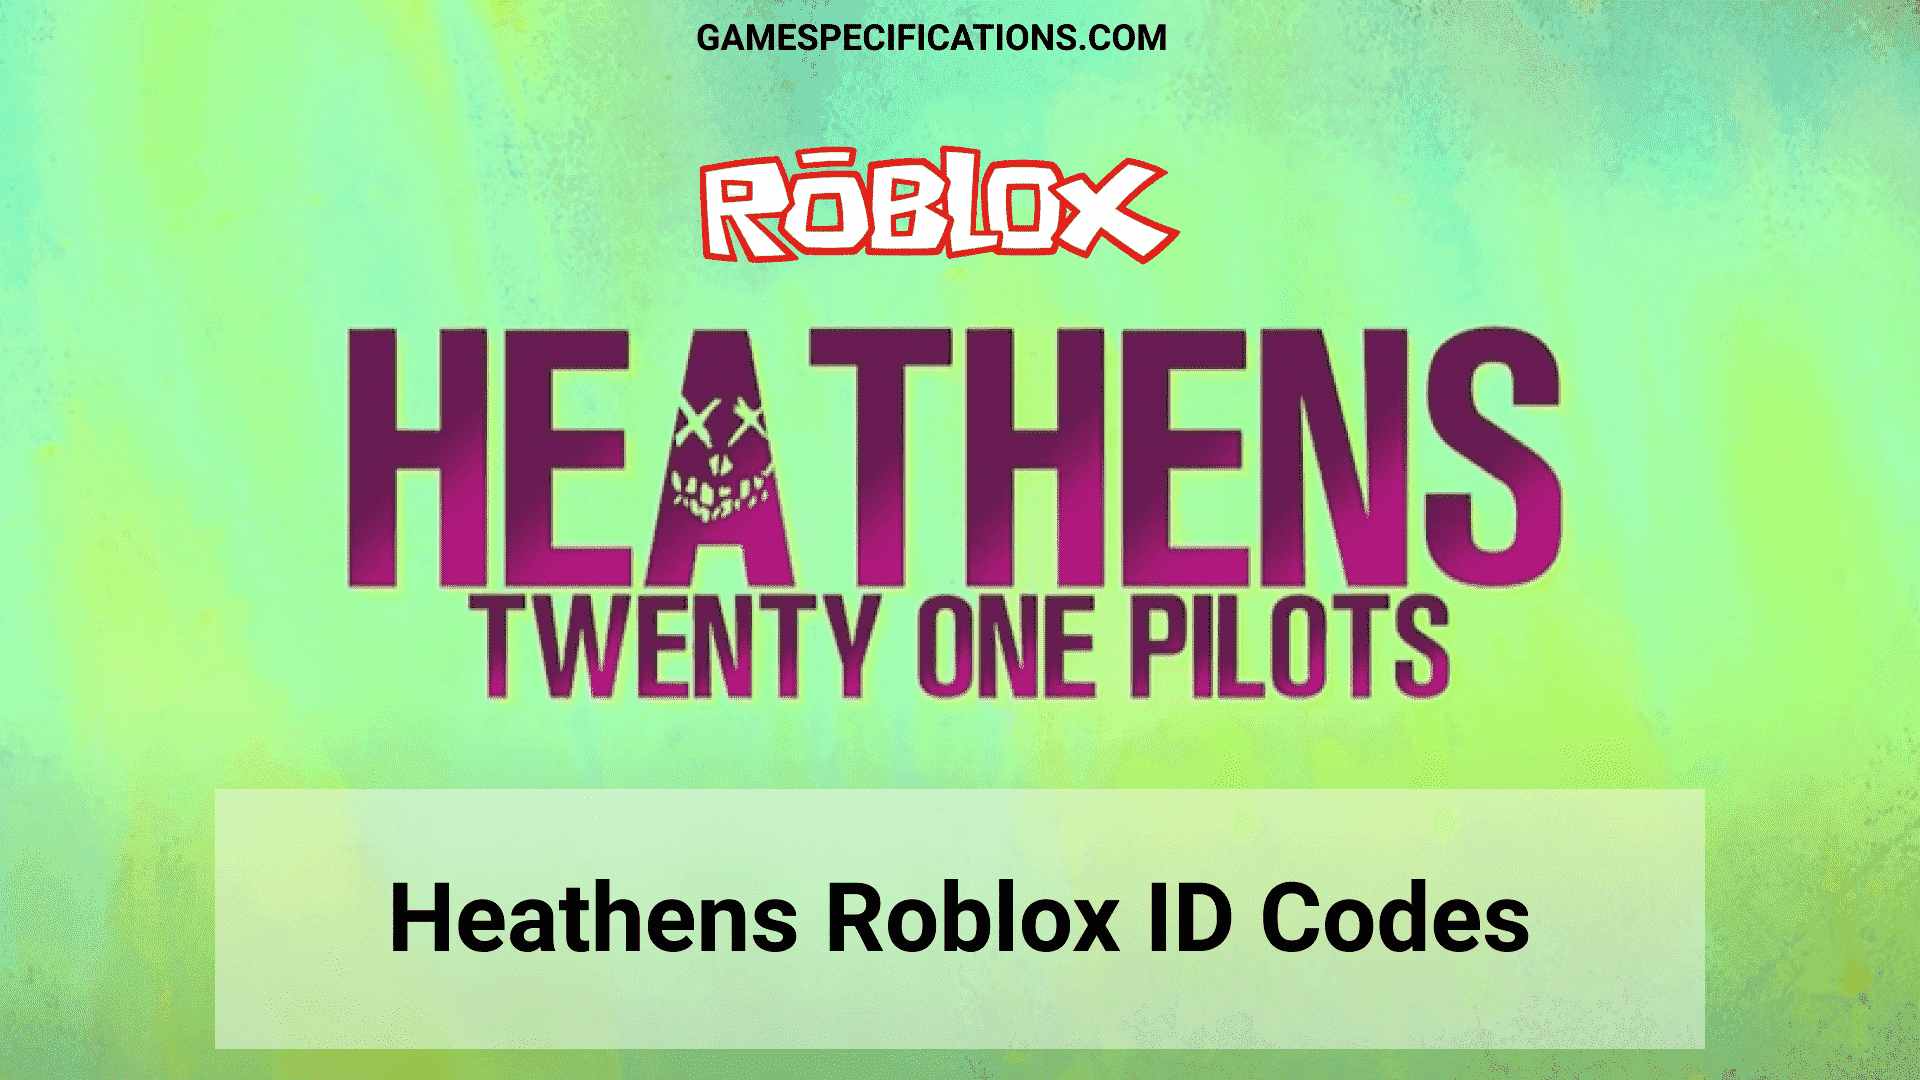 Heathens Roblox Id Codes 2021 Music Codes Game Specifications - roblox xbox one music